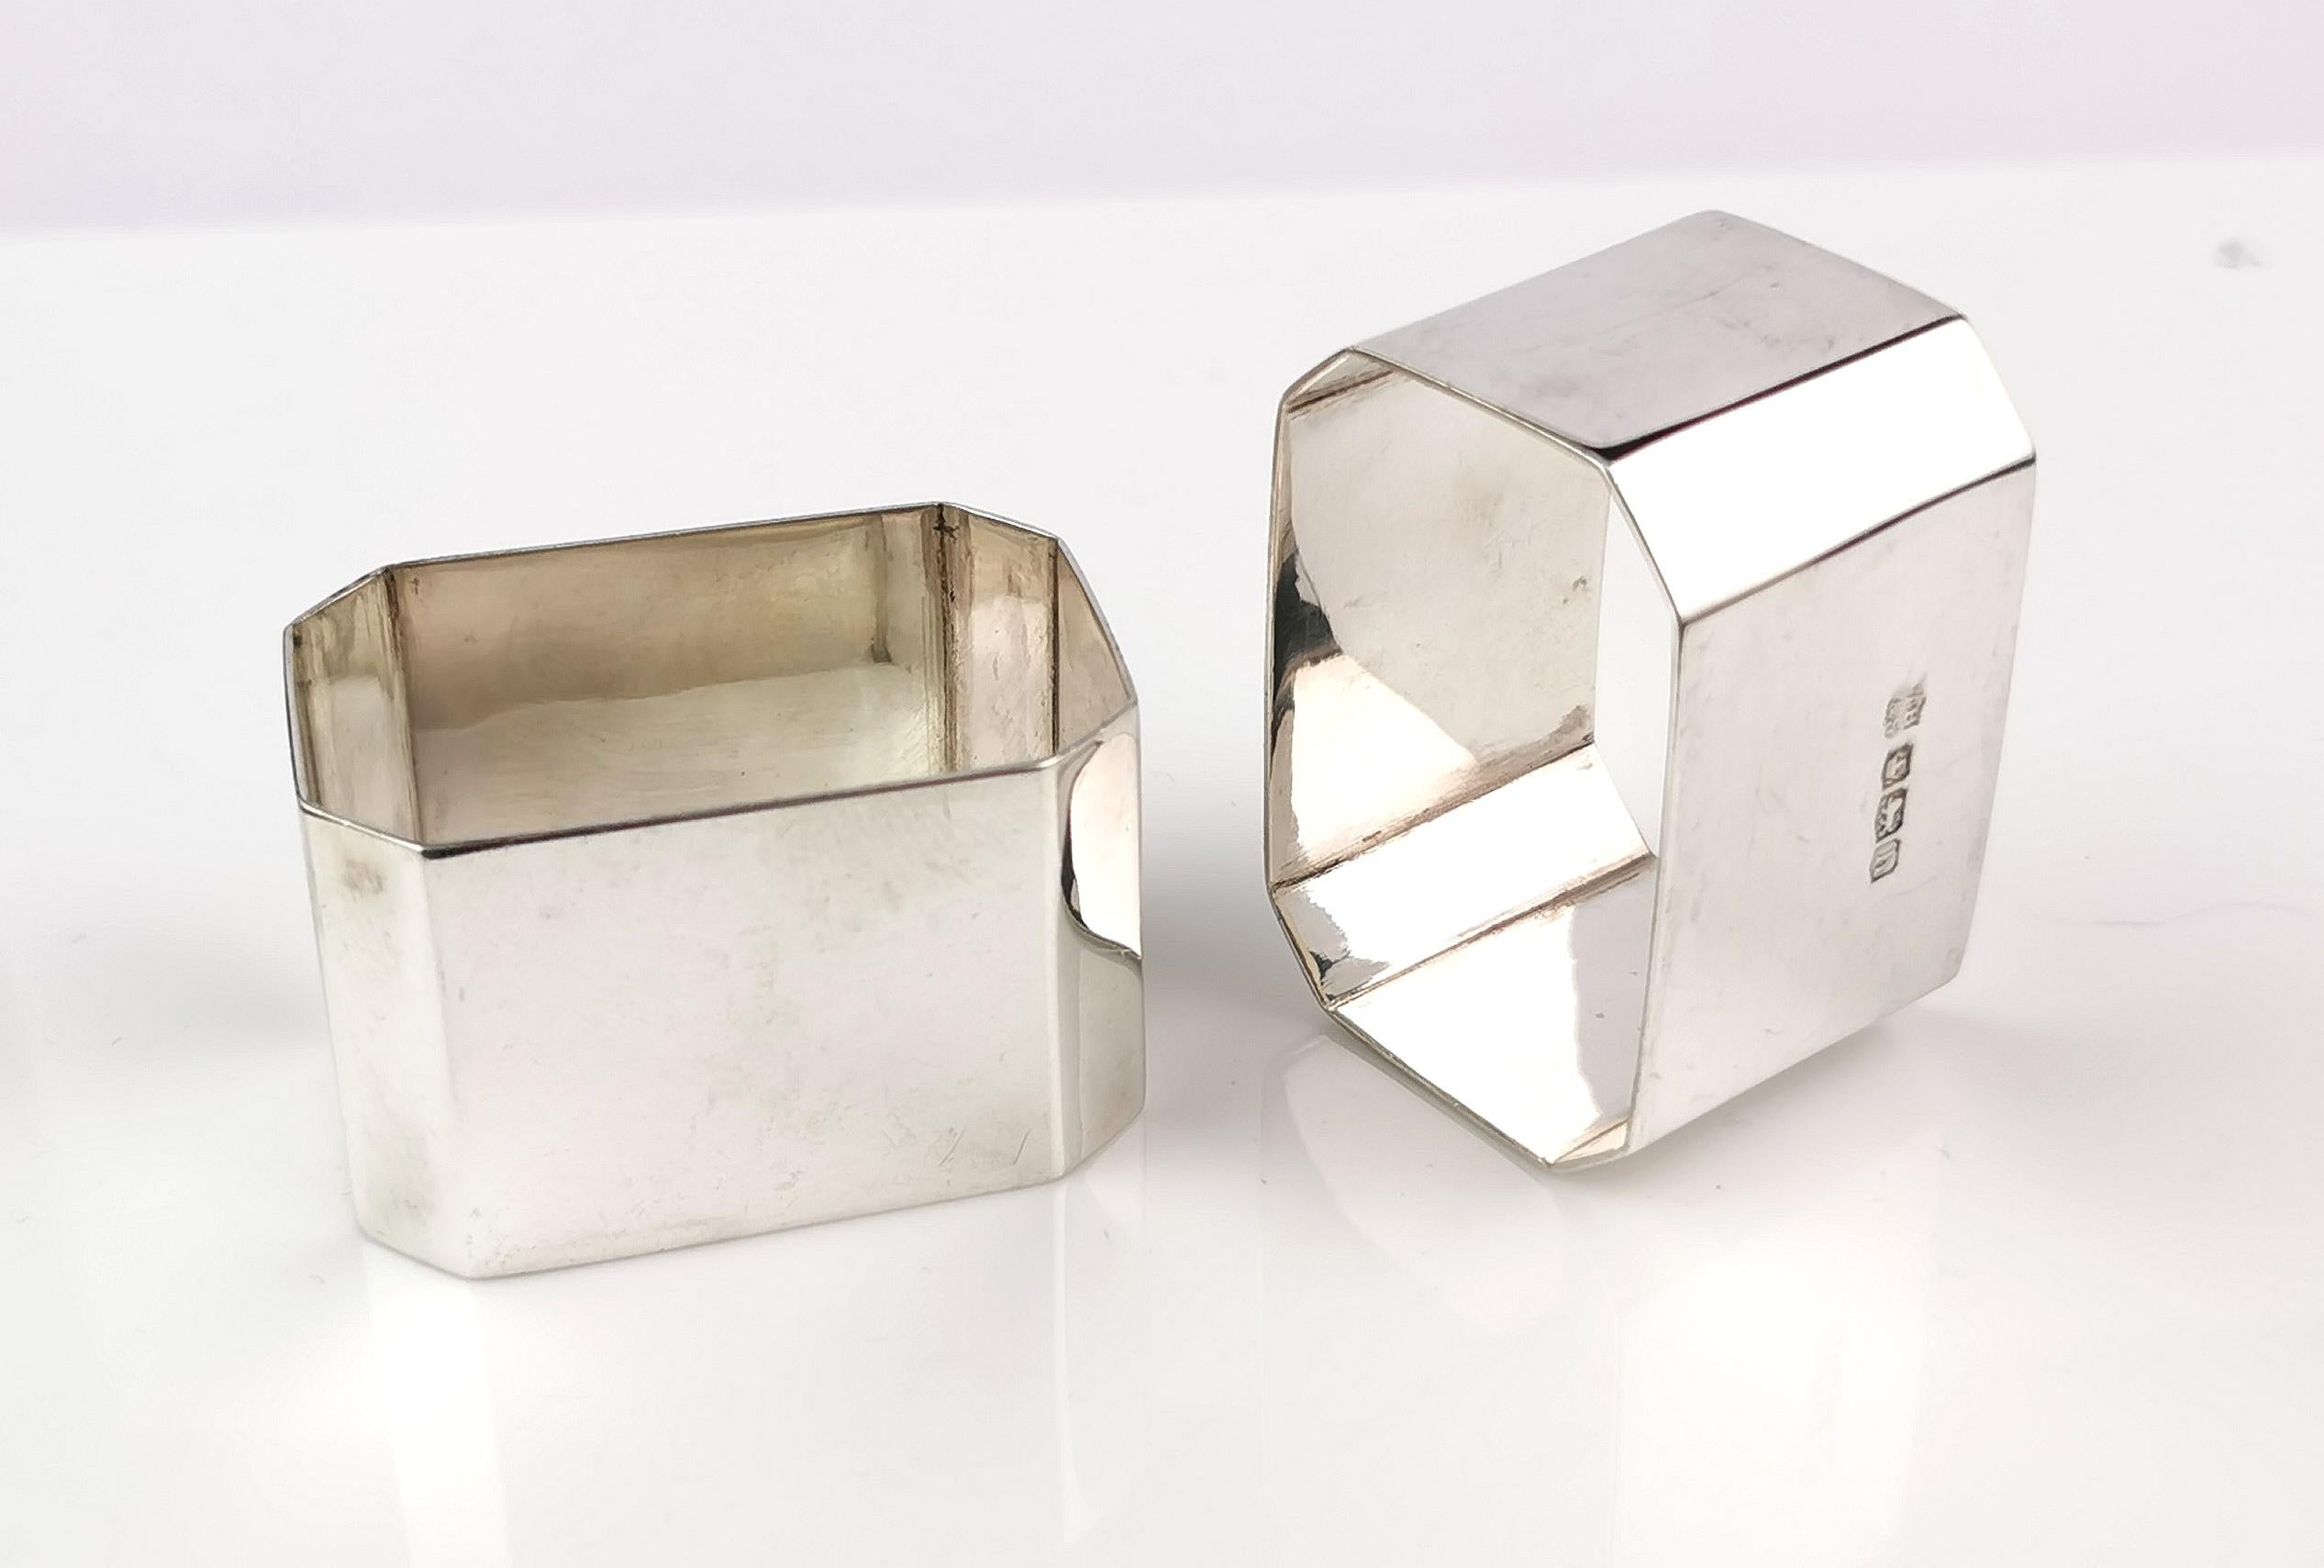 A very attractive pair of vintage, Art Deco era sterling silver napkin rings.

Art Deco design at its height with the wonderful geometric shapes popular in the era shining through with these 1920s napkin rings.

For not far off 100 years old this